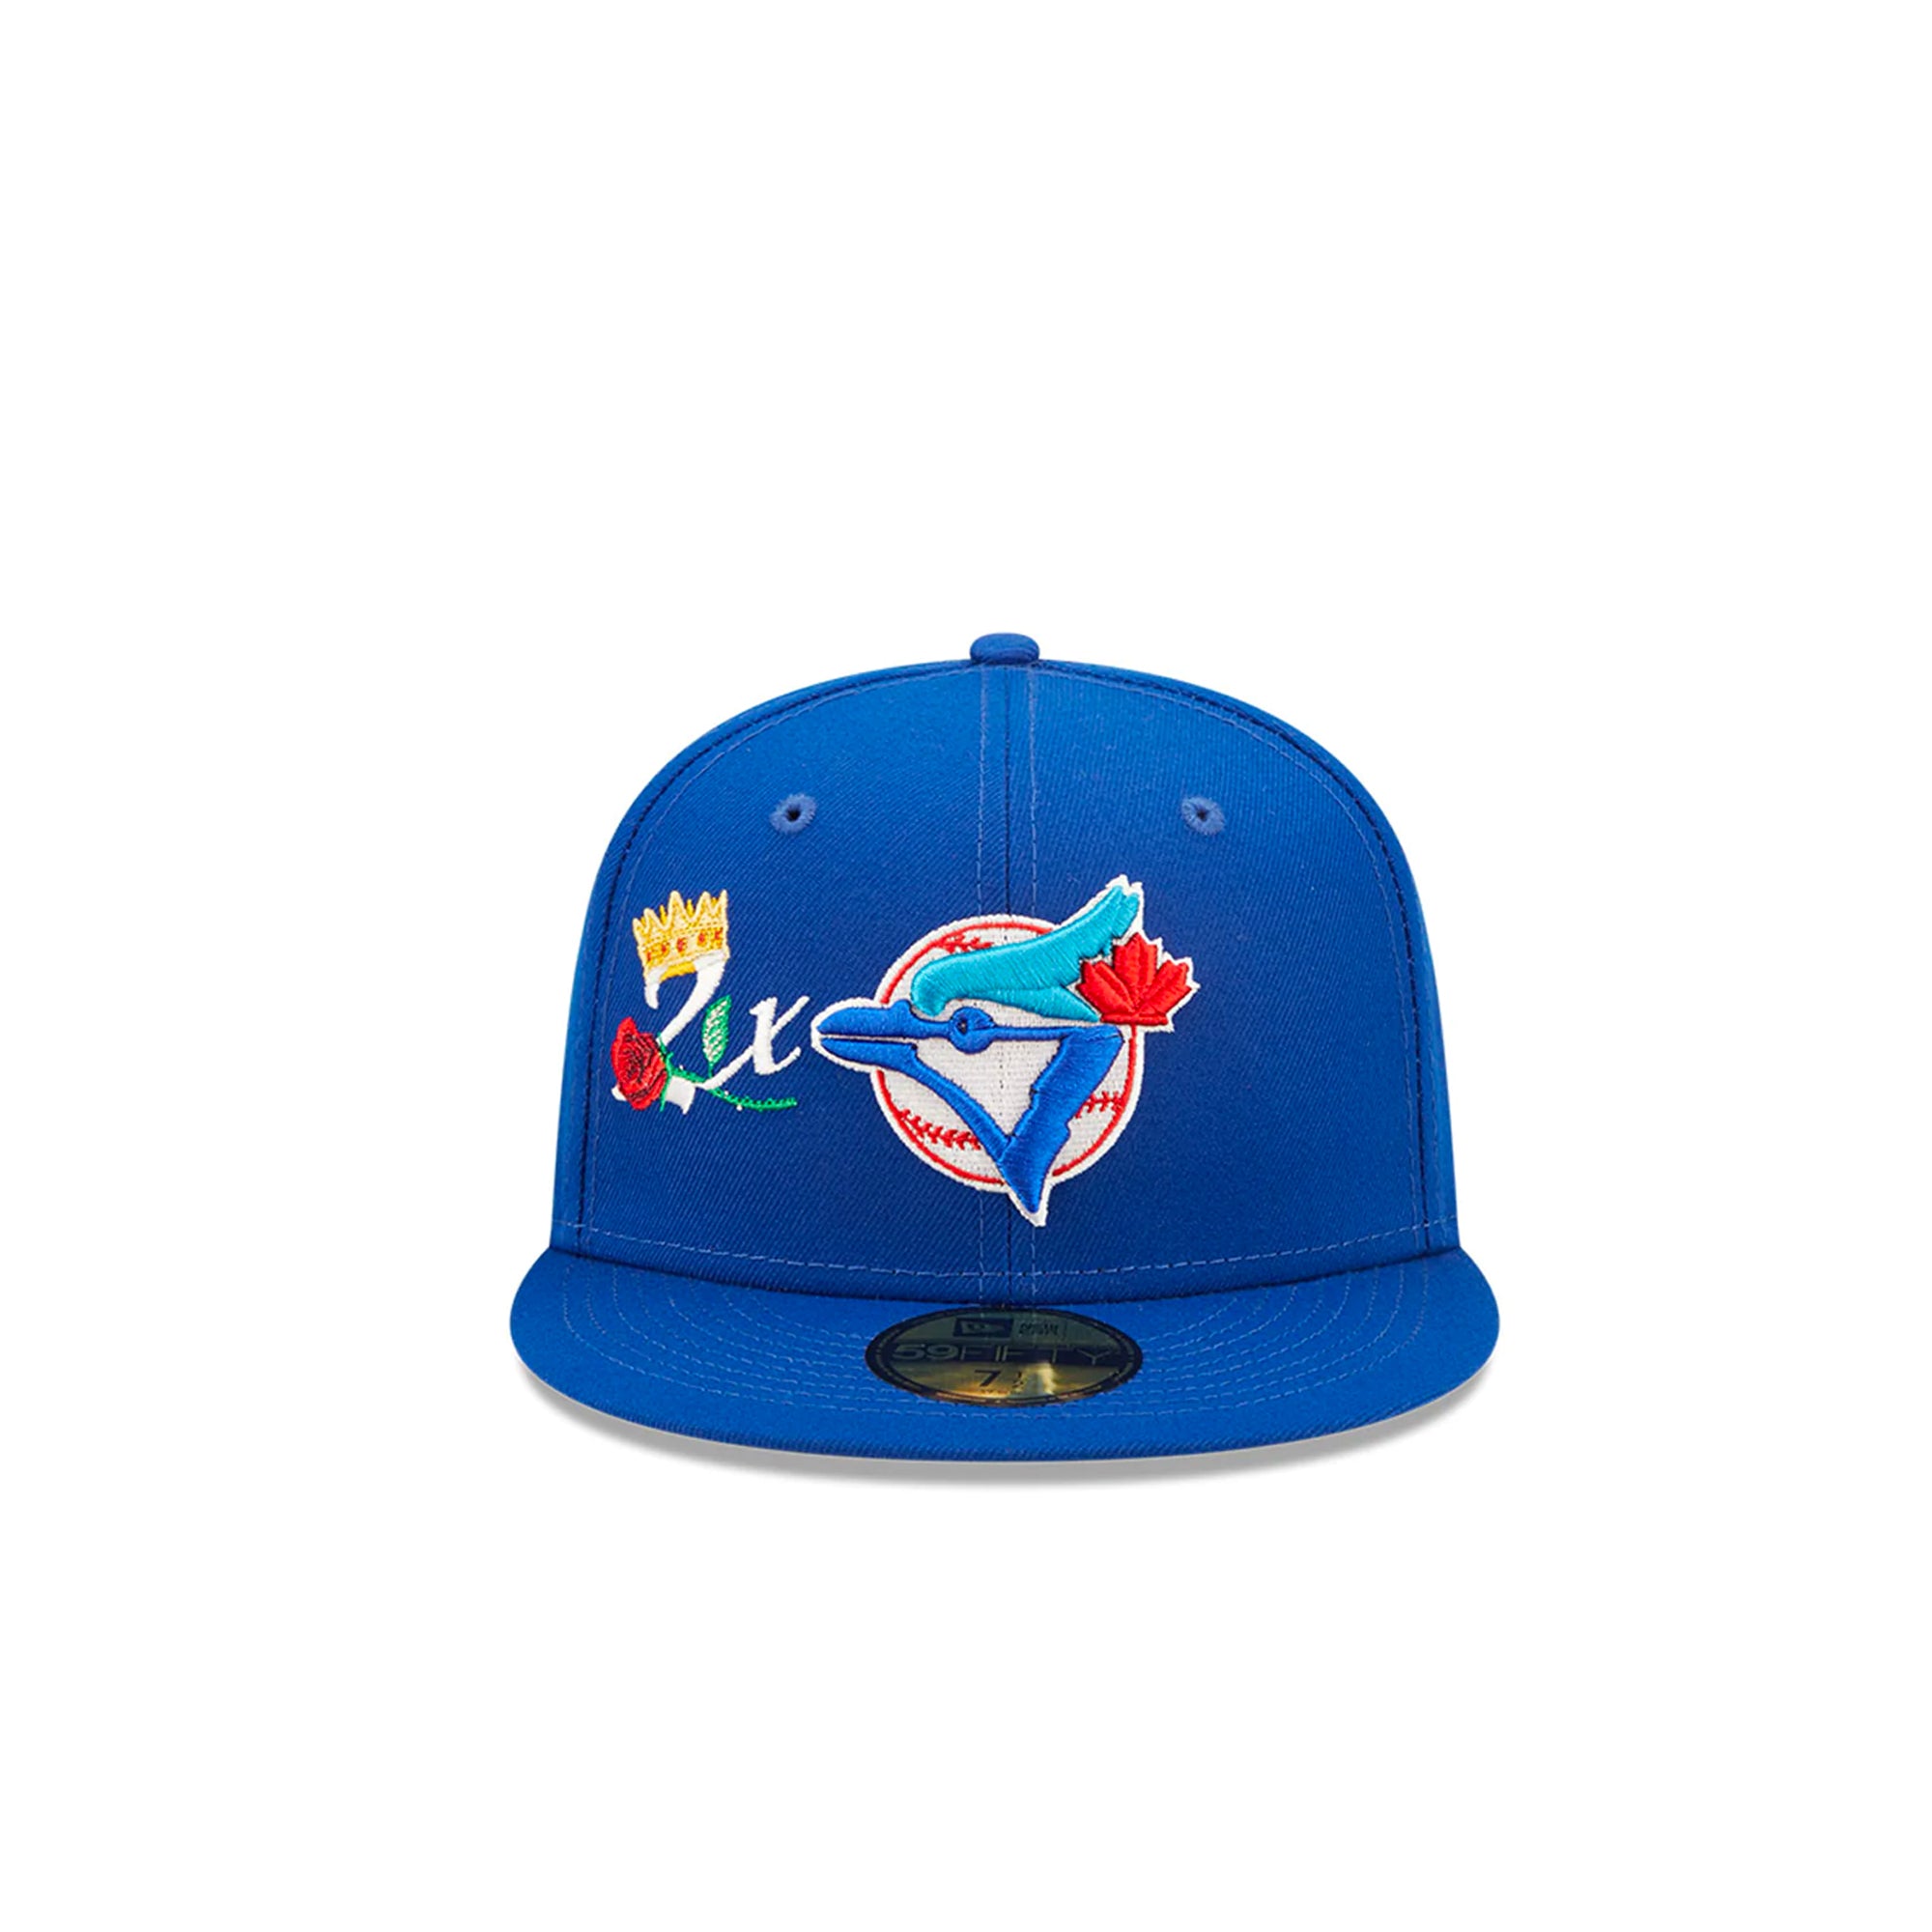 Toronto Blue Jays TWO-BIT Black-White Fitted Hat by New Era